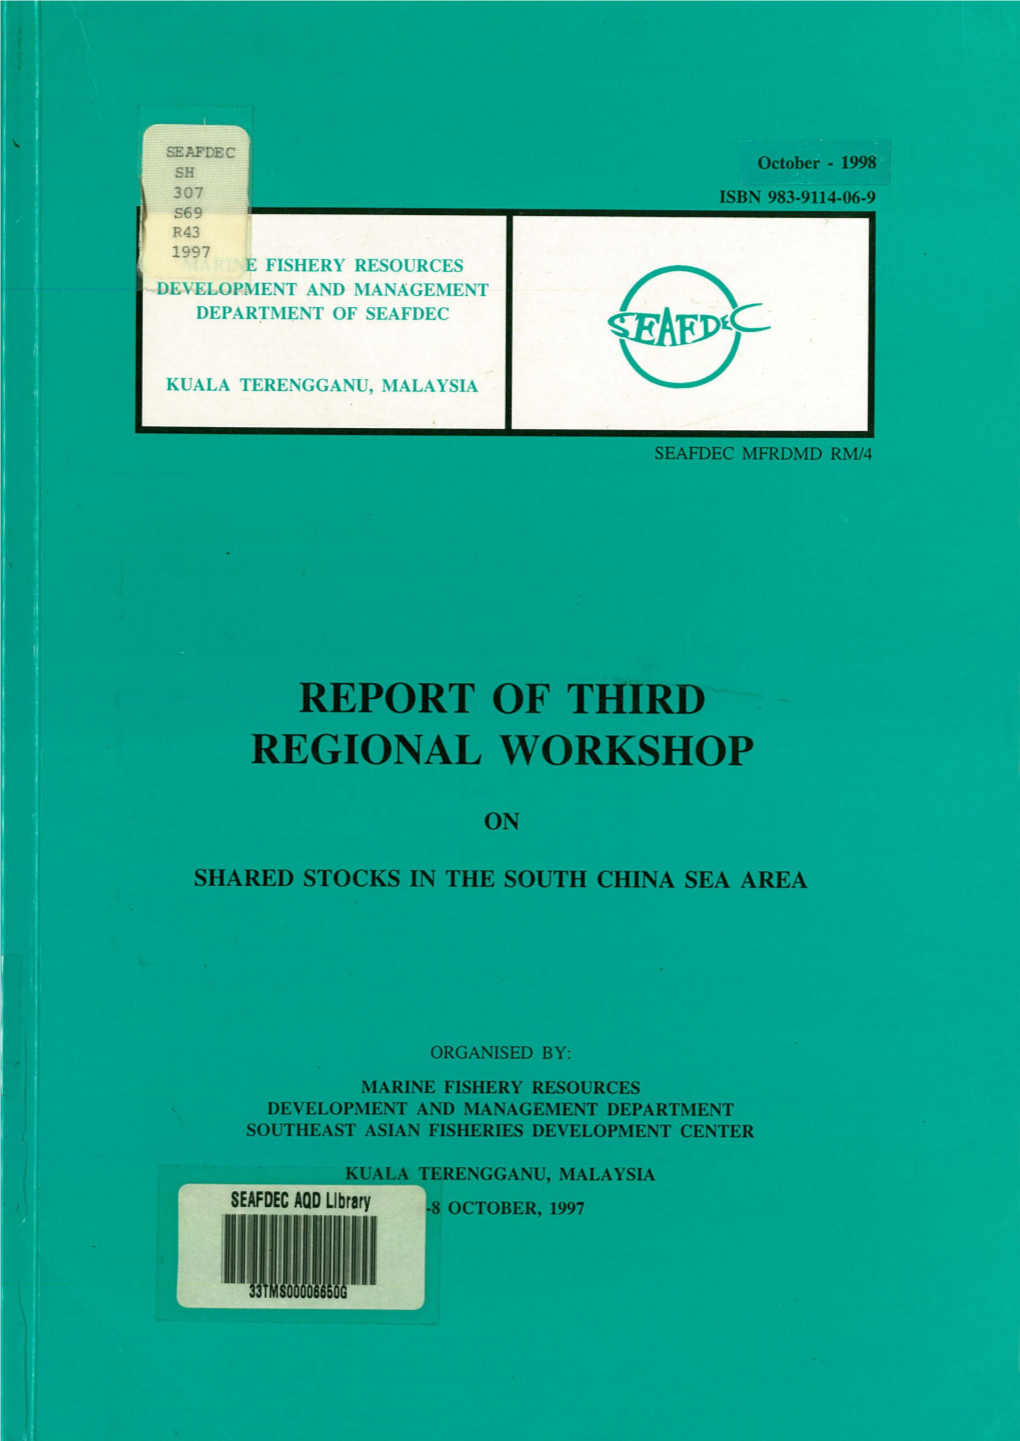 Report of Third Regional Workshop on Shared Stocks in the South China Sea Area, Kuala Terengganu, Malaysia